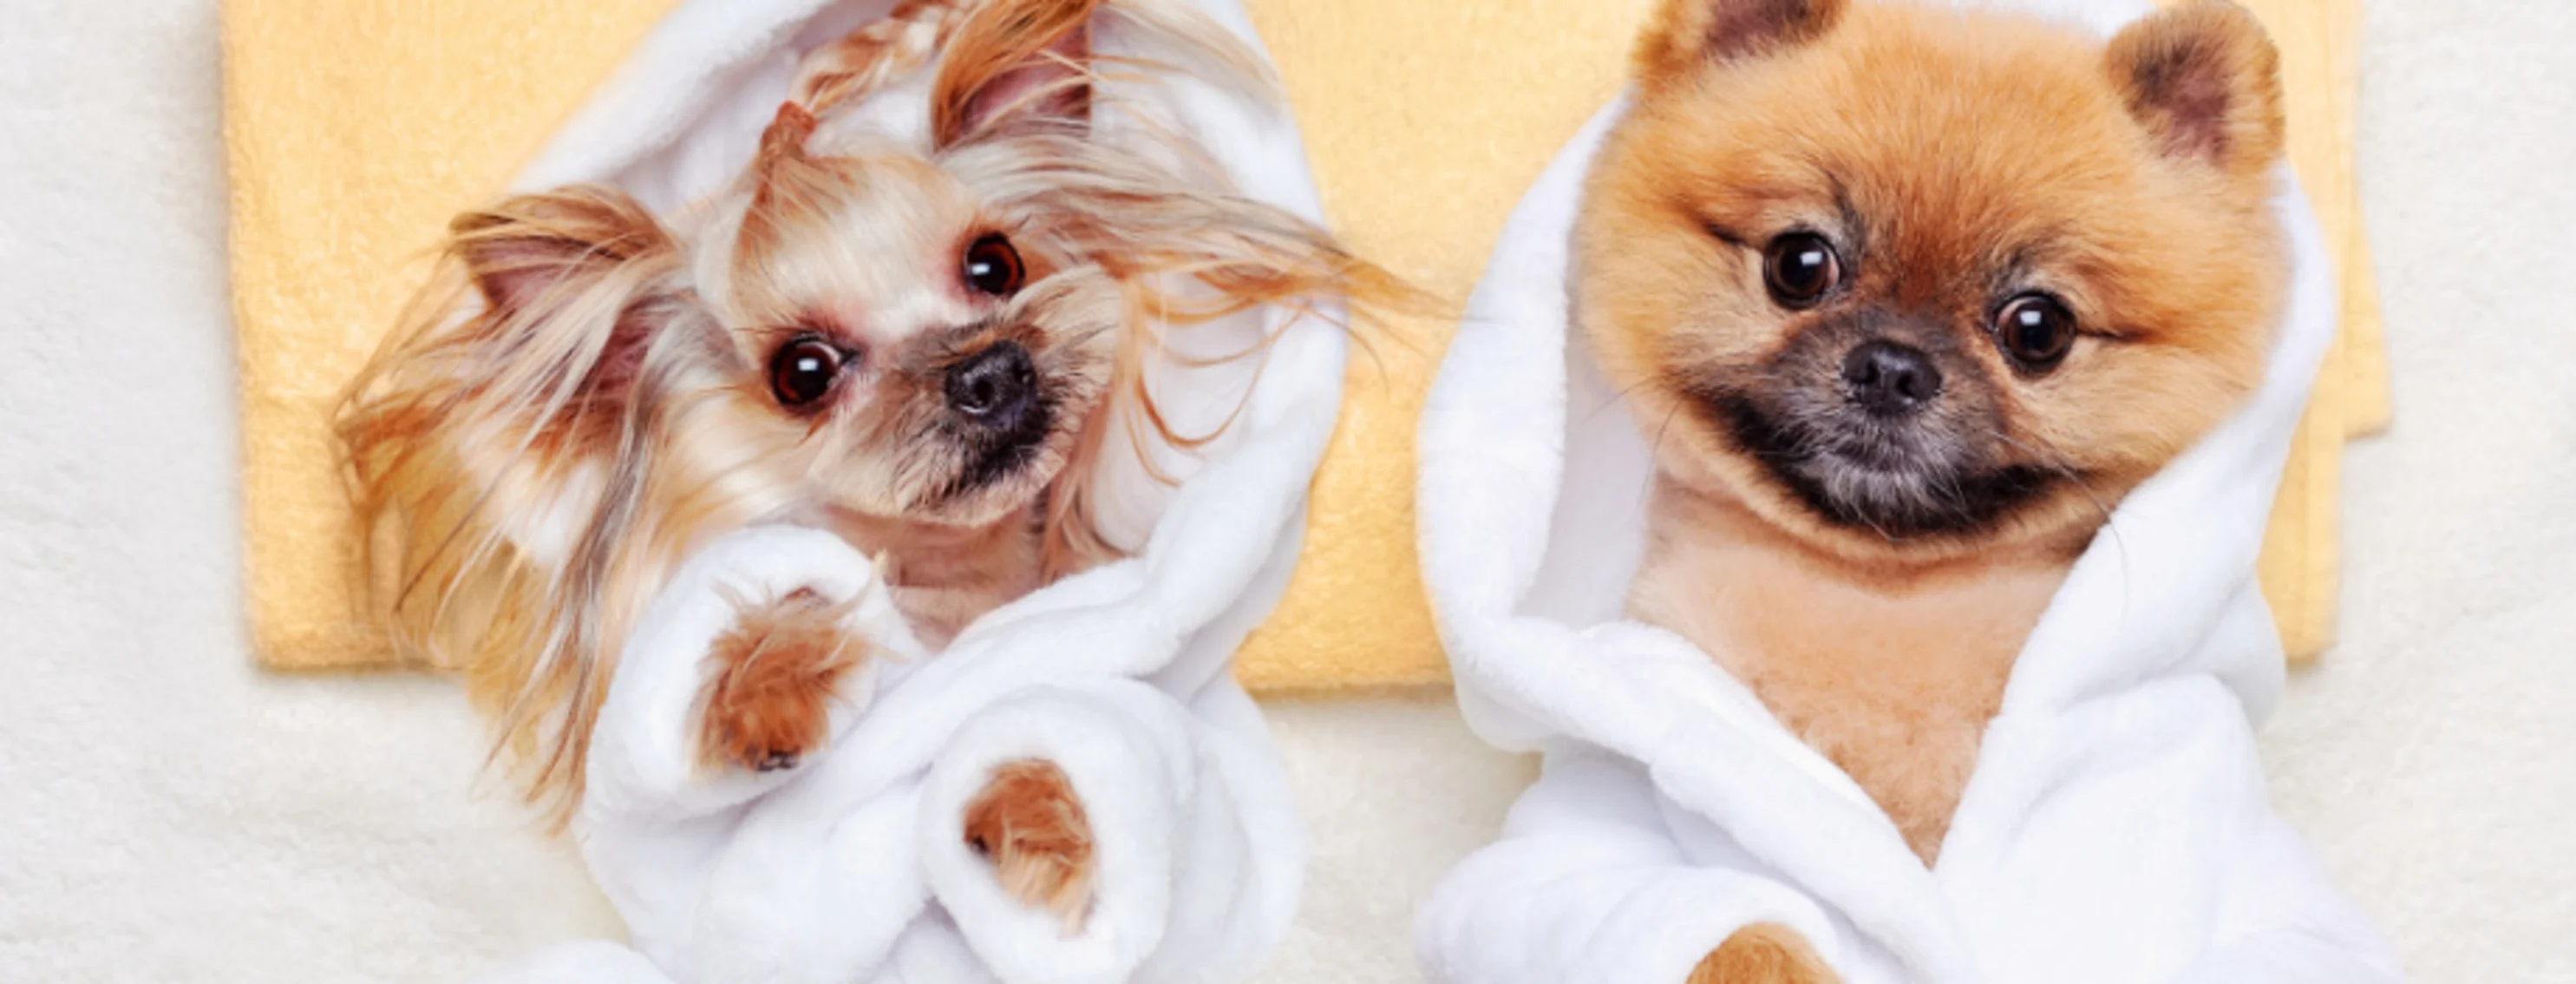 Two Dogs Wearing Bathrobes Lying on a Towel